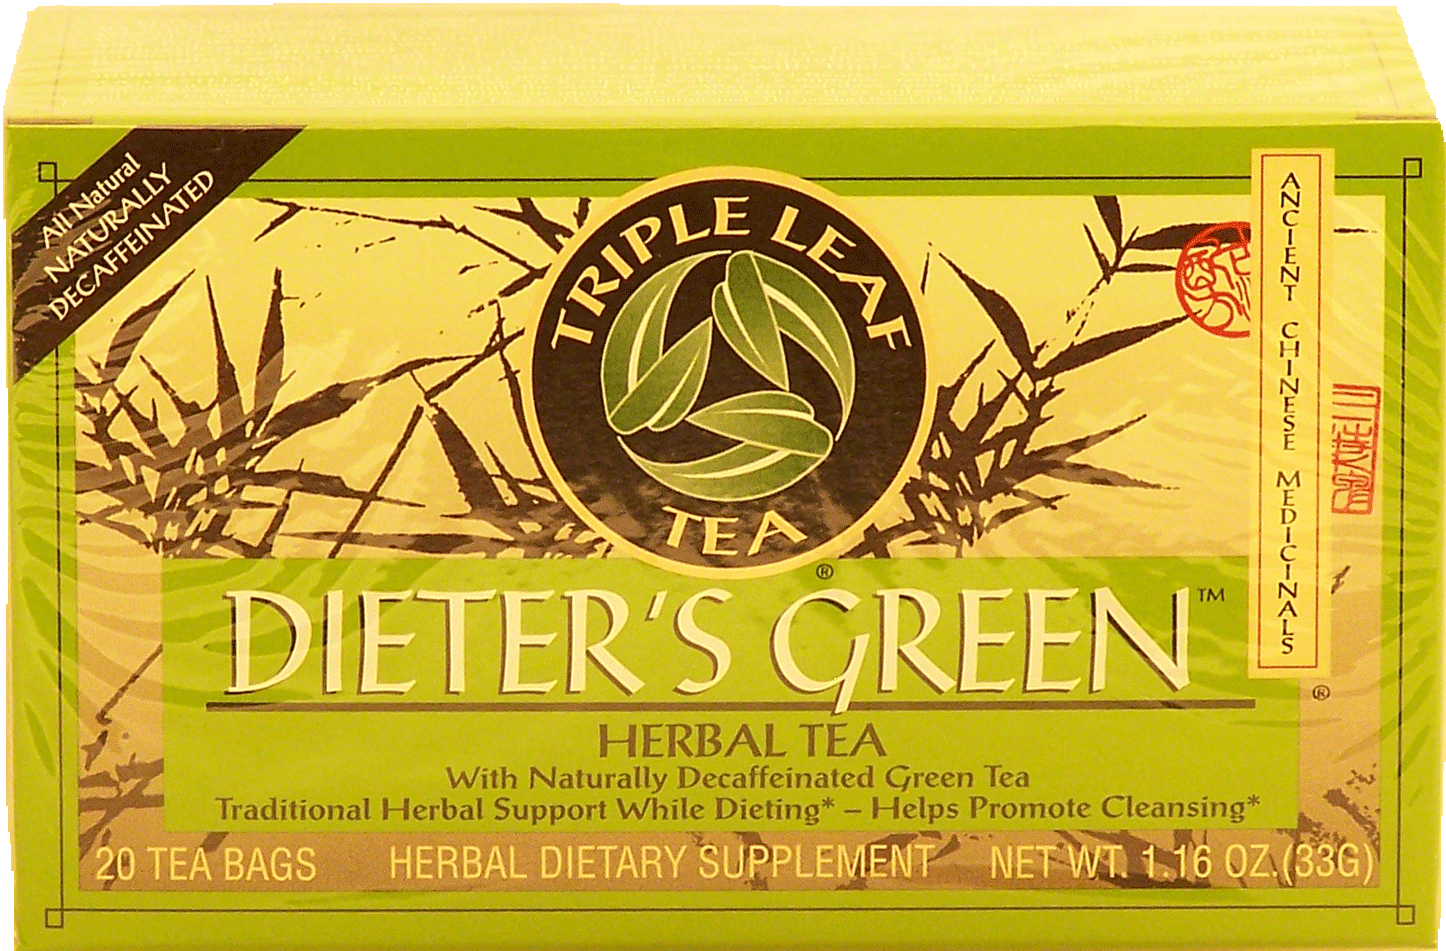 Triple Leaf Tea Dieter's Green herbal tea, decaf, chinese medicinal, 20-bags Full-Size Picture